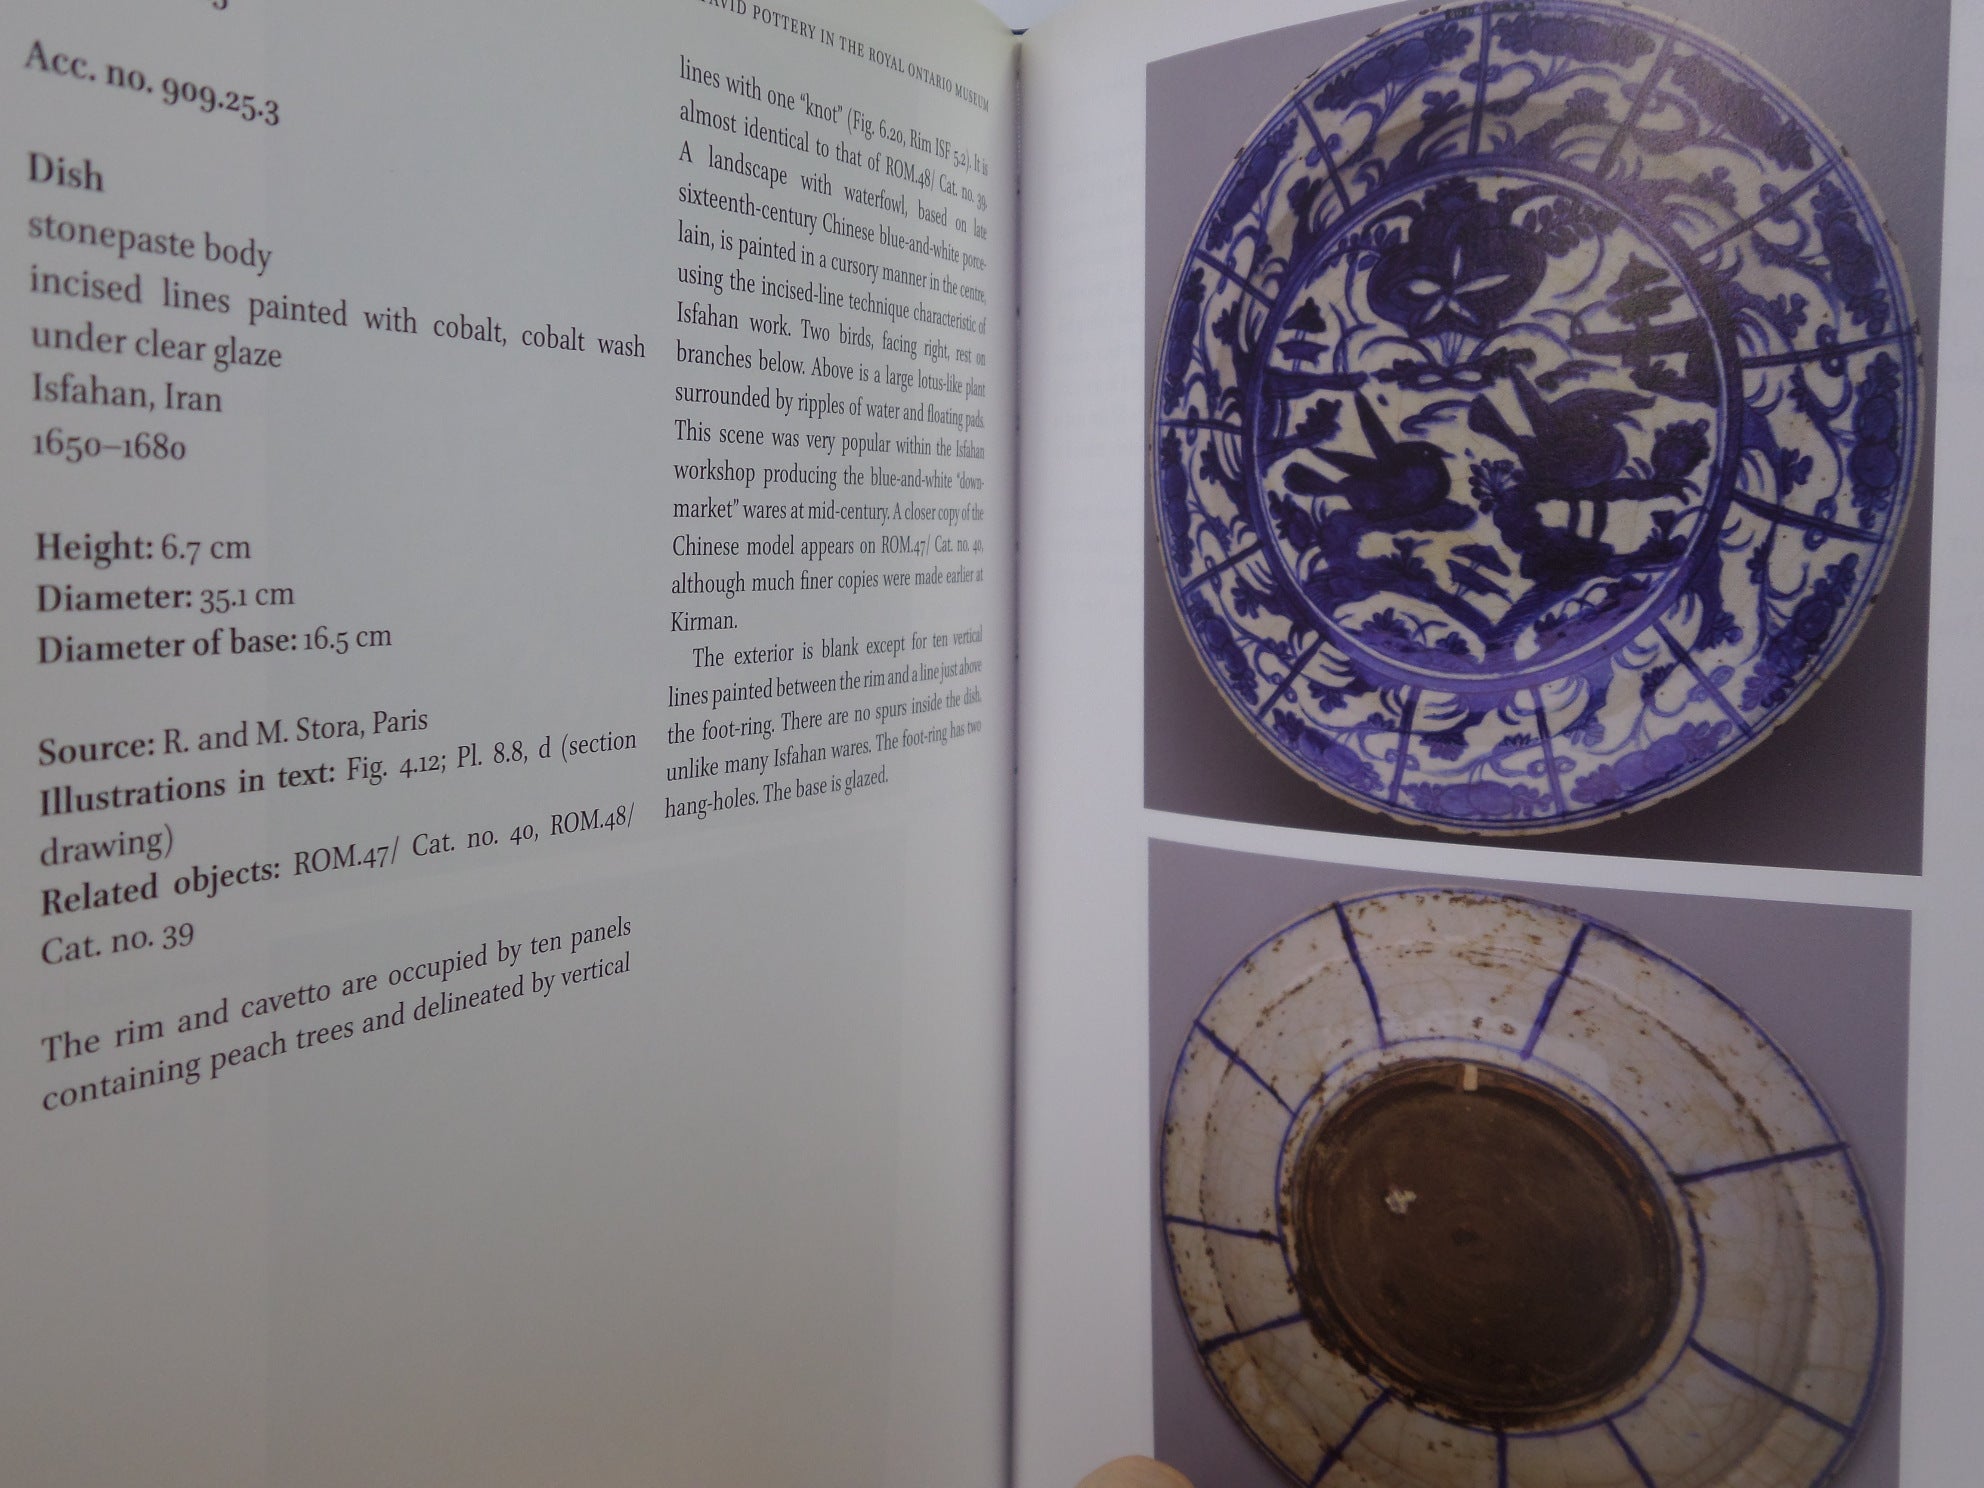 PERSIAN POTTERY IN THE FIRST GLOBAL AGE: THE SIXTEENTH AND SEVENTEENTH CENTURIES 2014 FIRST EDITION HARDCOVER